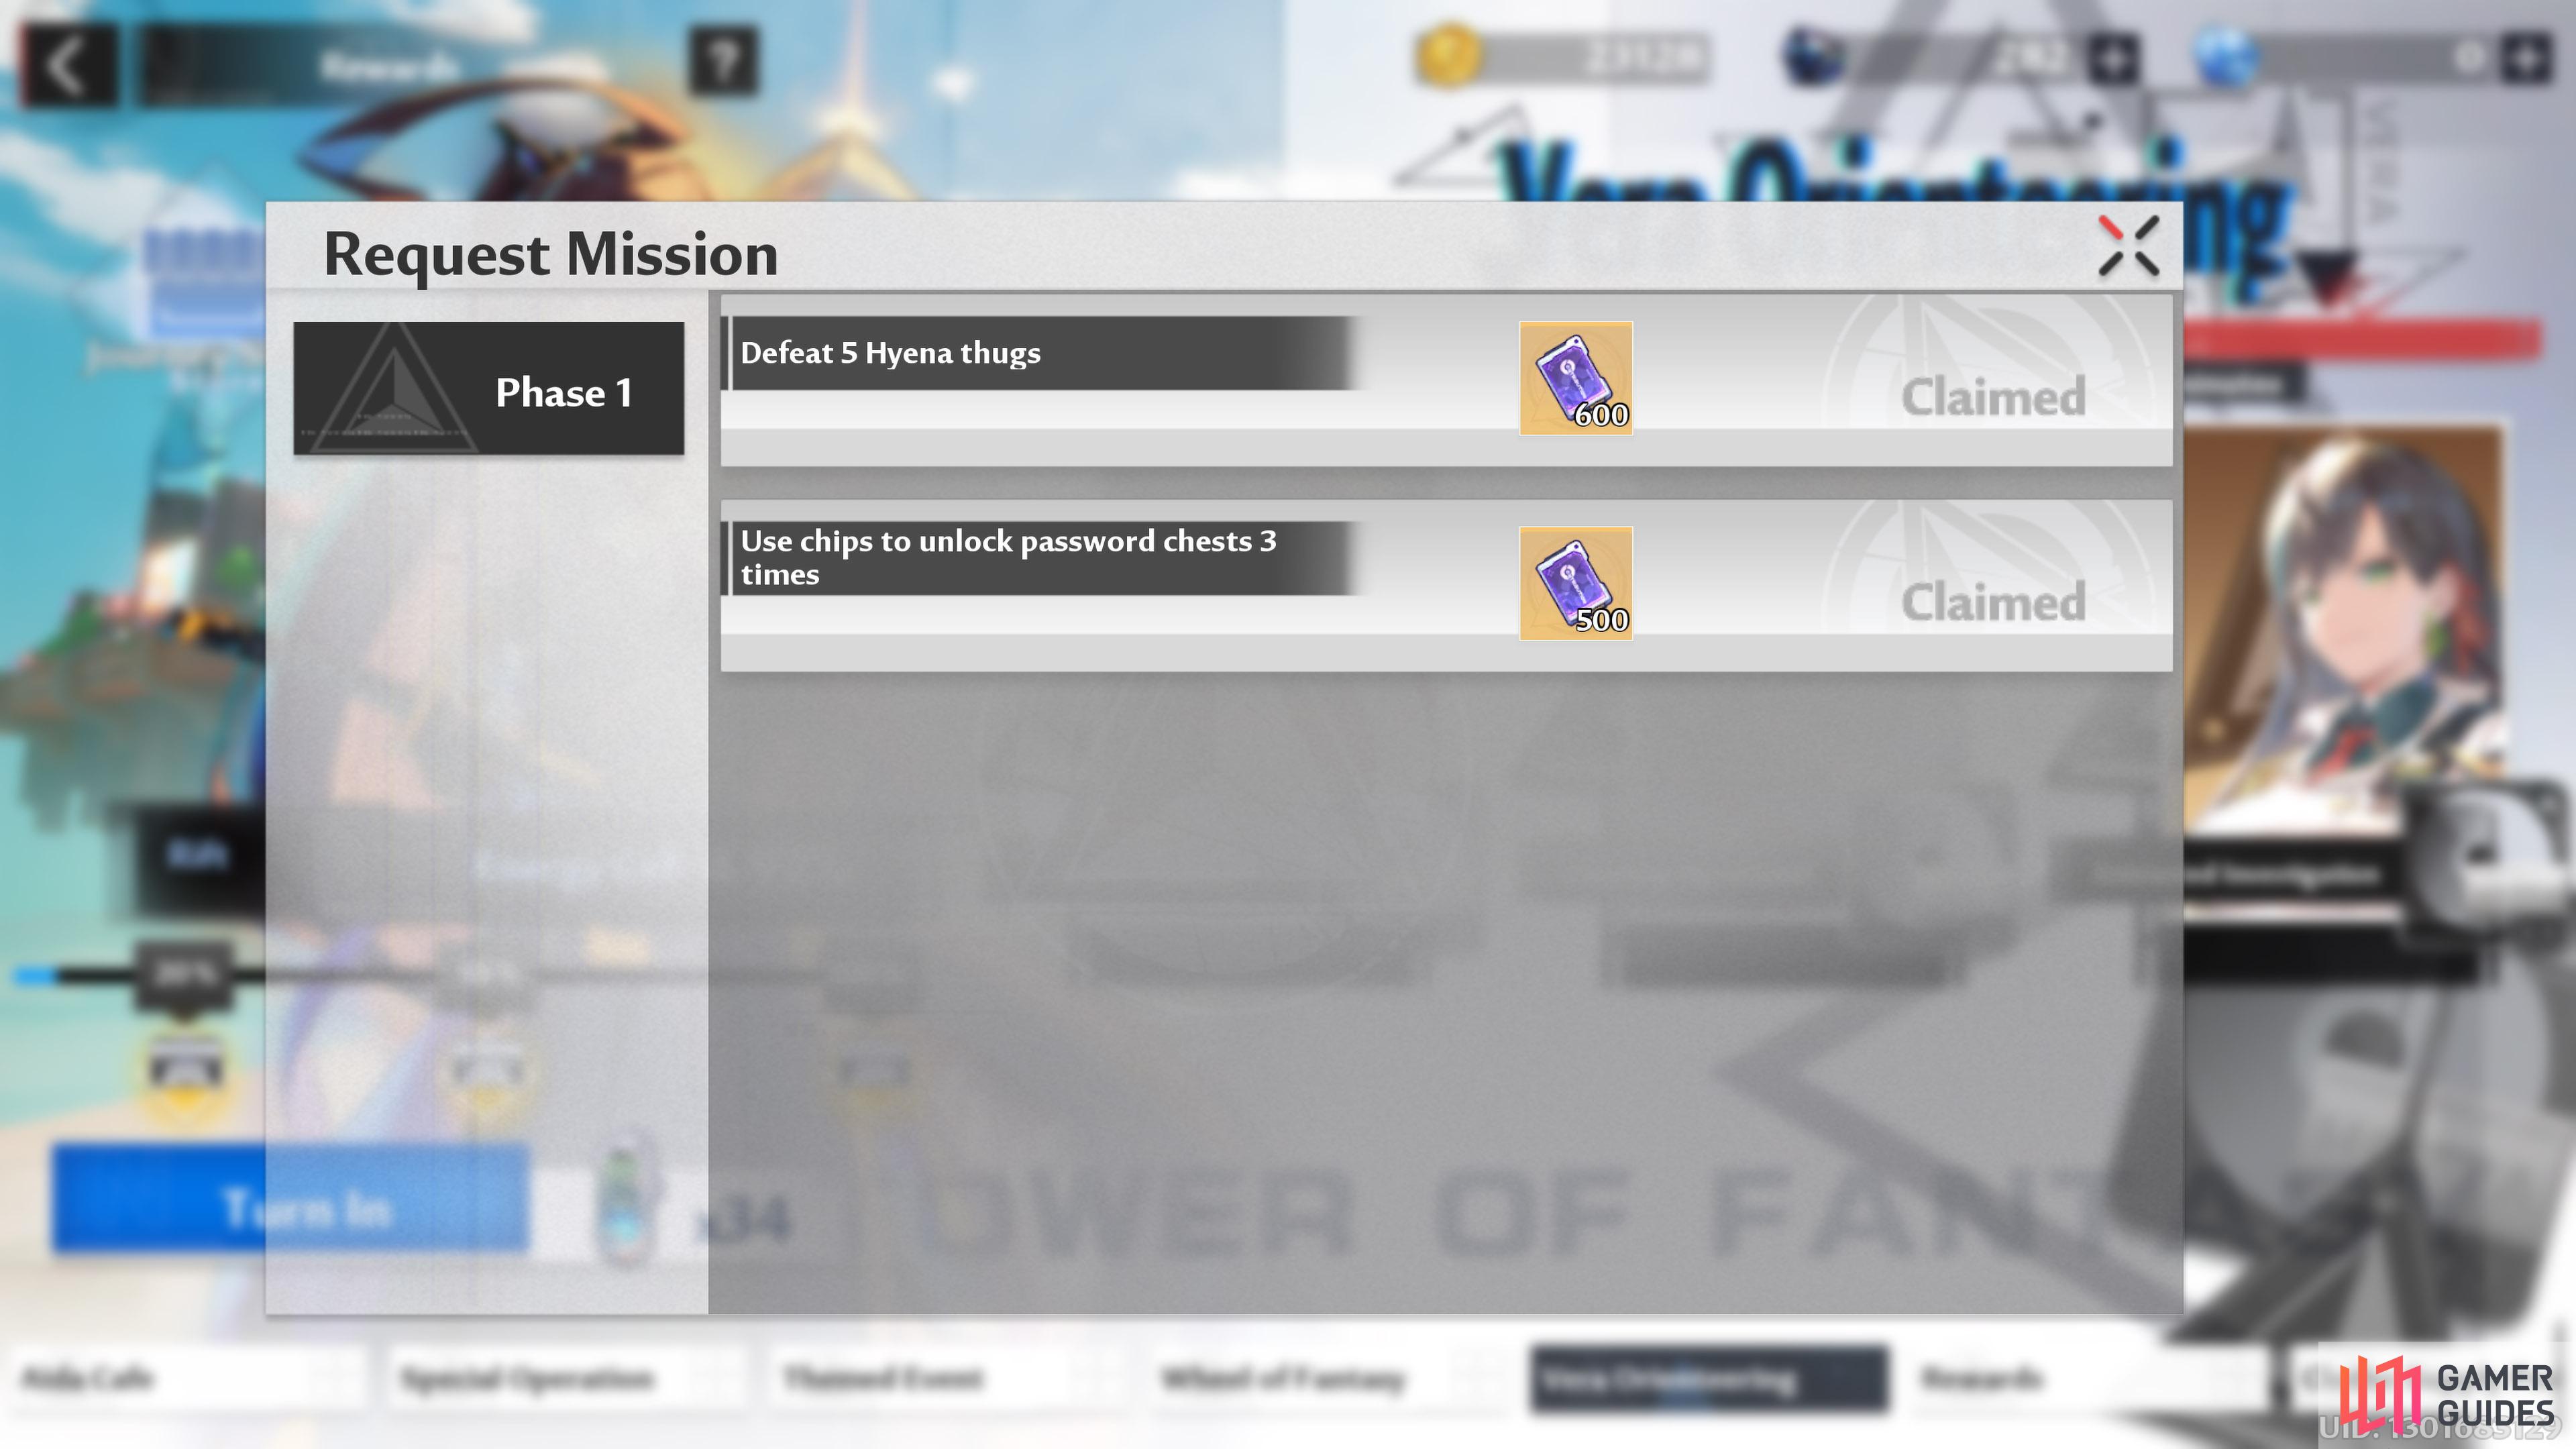 When you click on "Entrusted Investigation", that'll be phase one, and you'll be taken to the Request Mission screen where you can obtain your rewards.